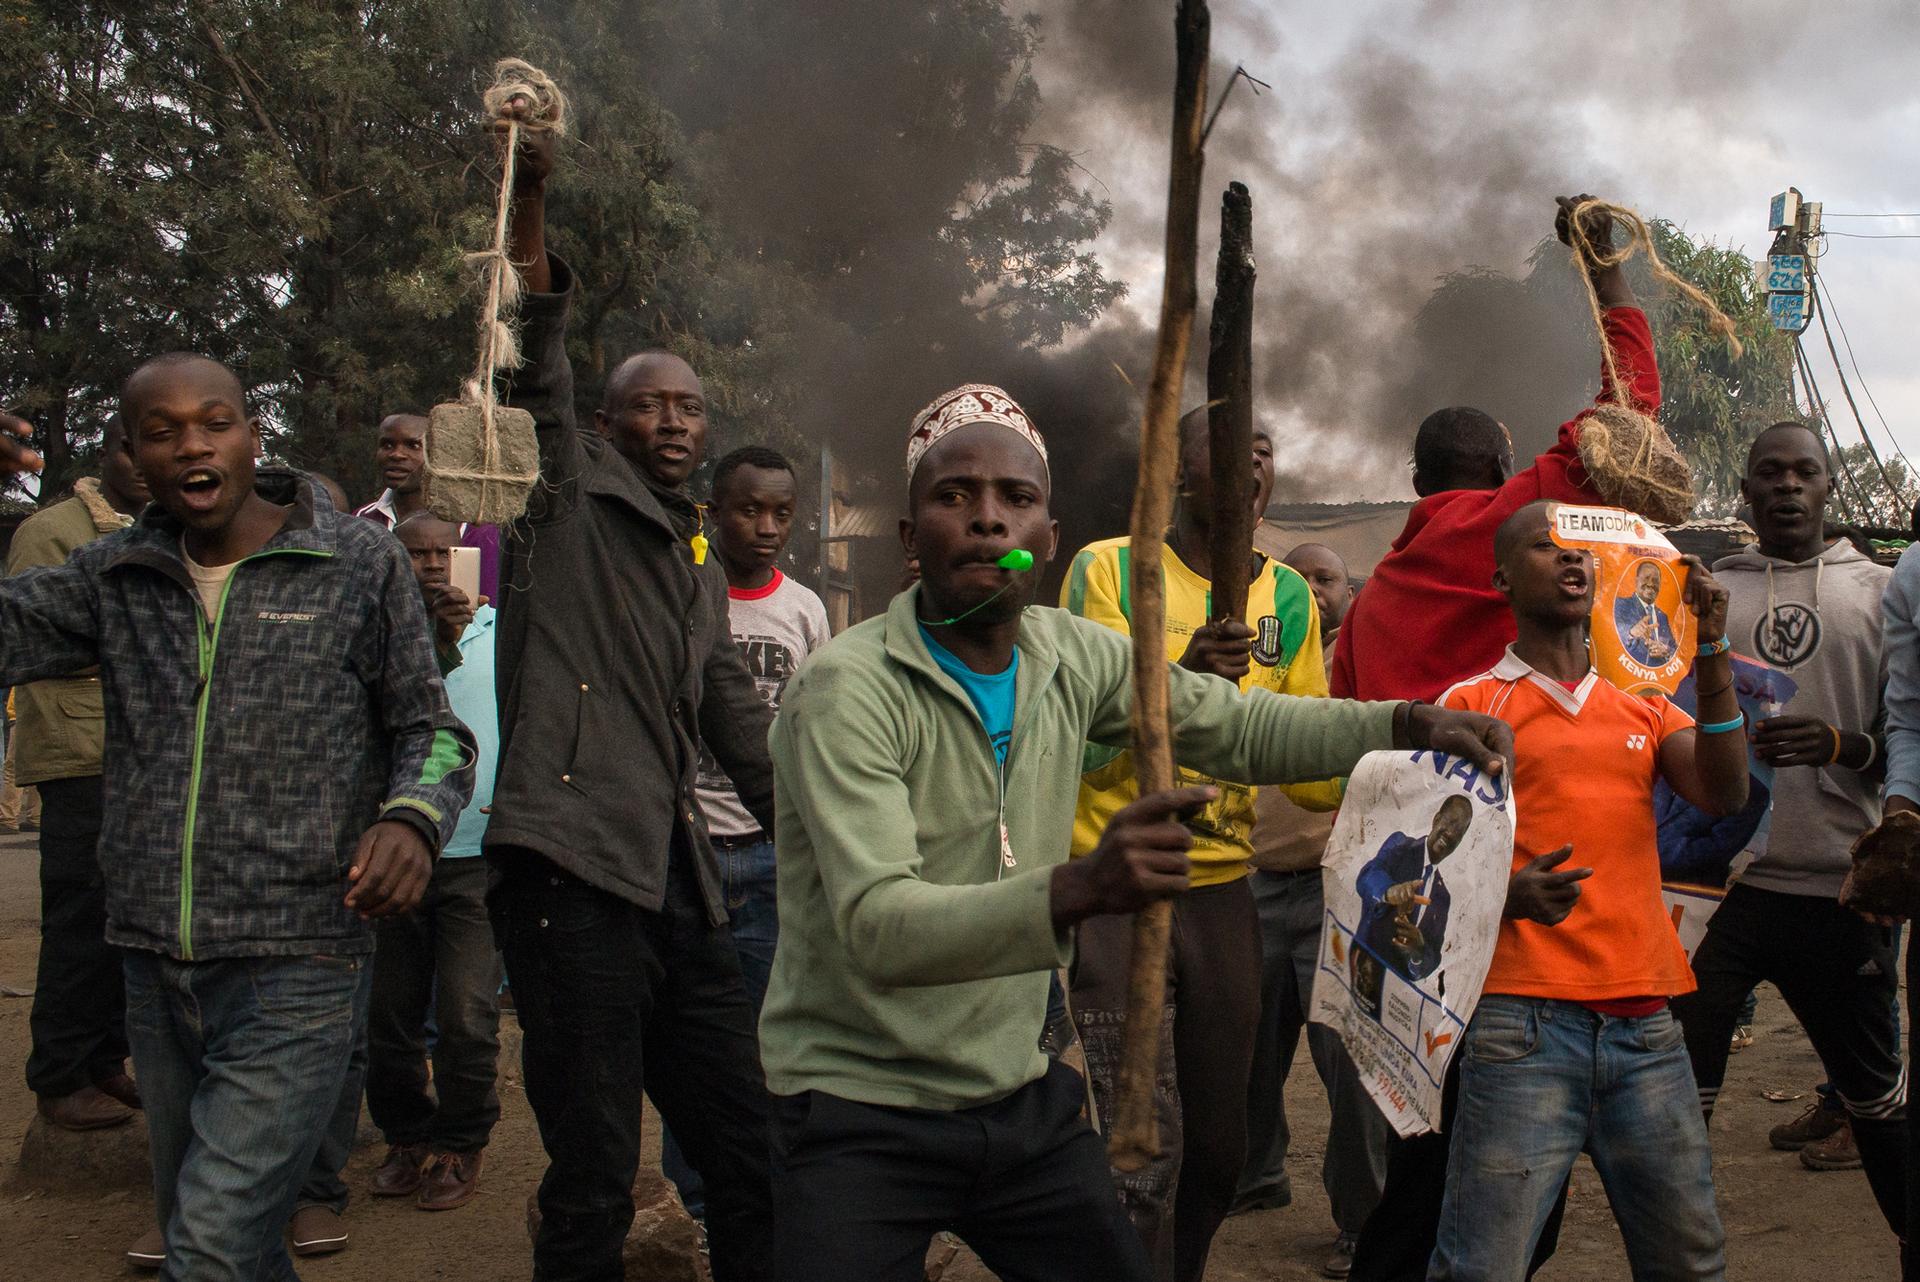 Men arm themselves with stones and clubs before clashing with residents in Kibera, an informal settlement in Nairobi, Kenya. The men supported presidential candidate Raila Odinga of the National Super Alliance over current President Uhuru Kenyatta.